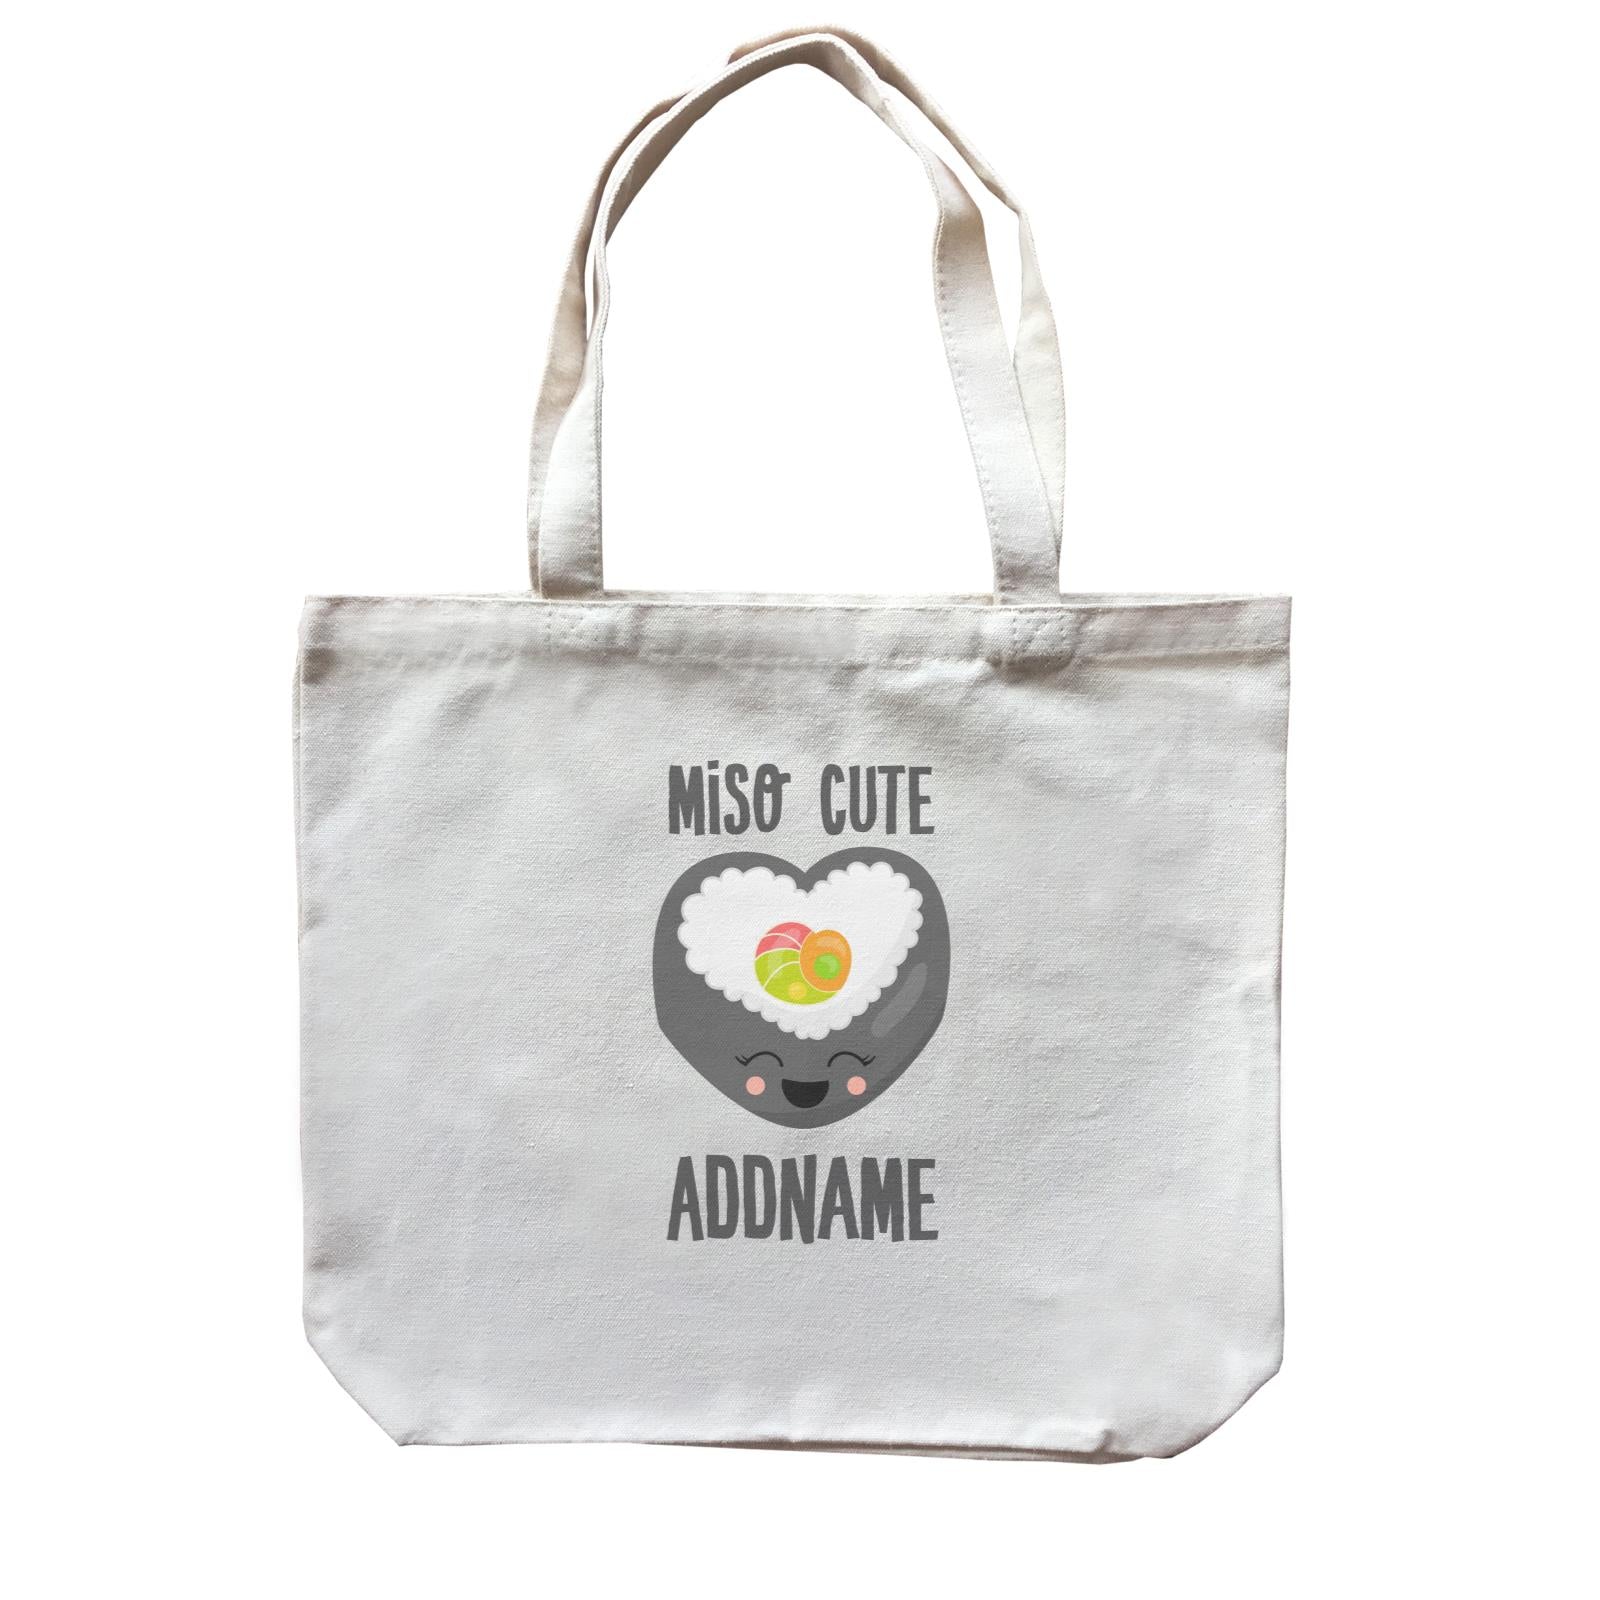 Miso Cute Sushi Heart Roll Addname Canvas Bag